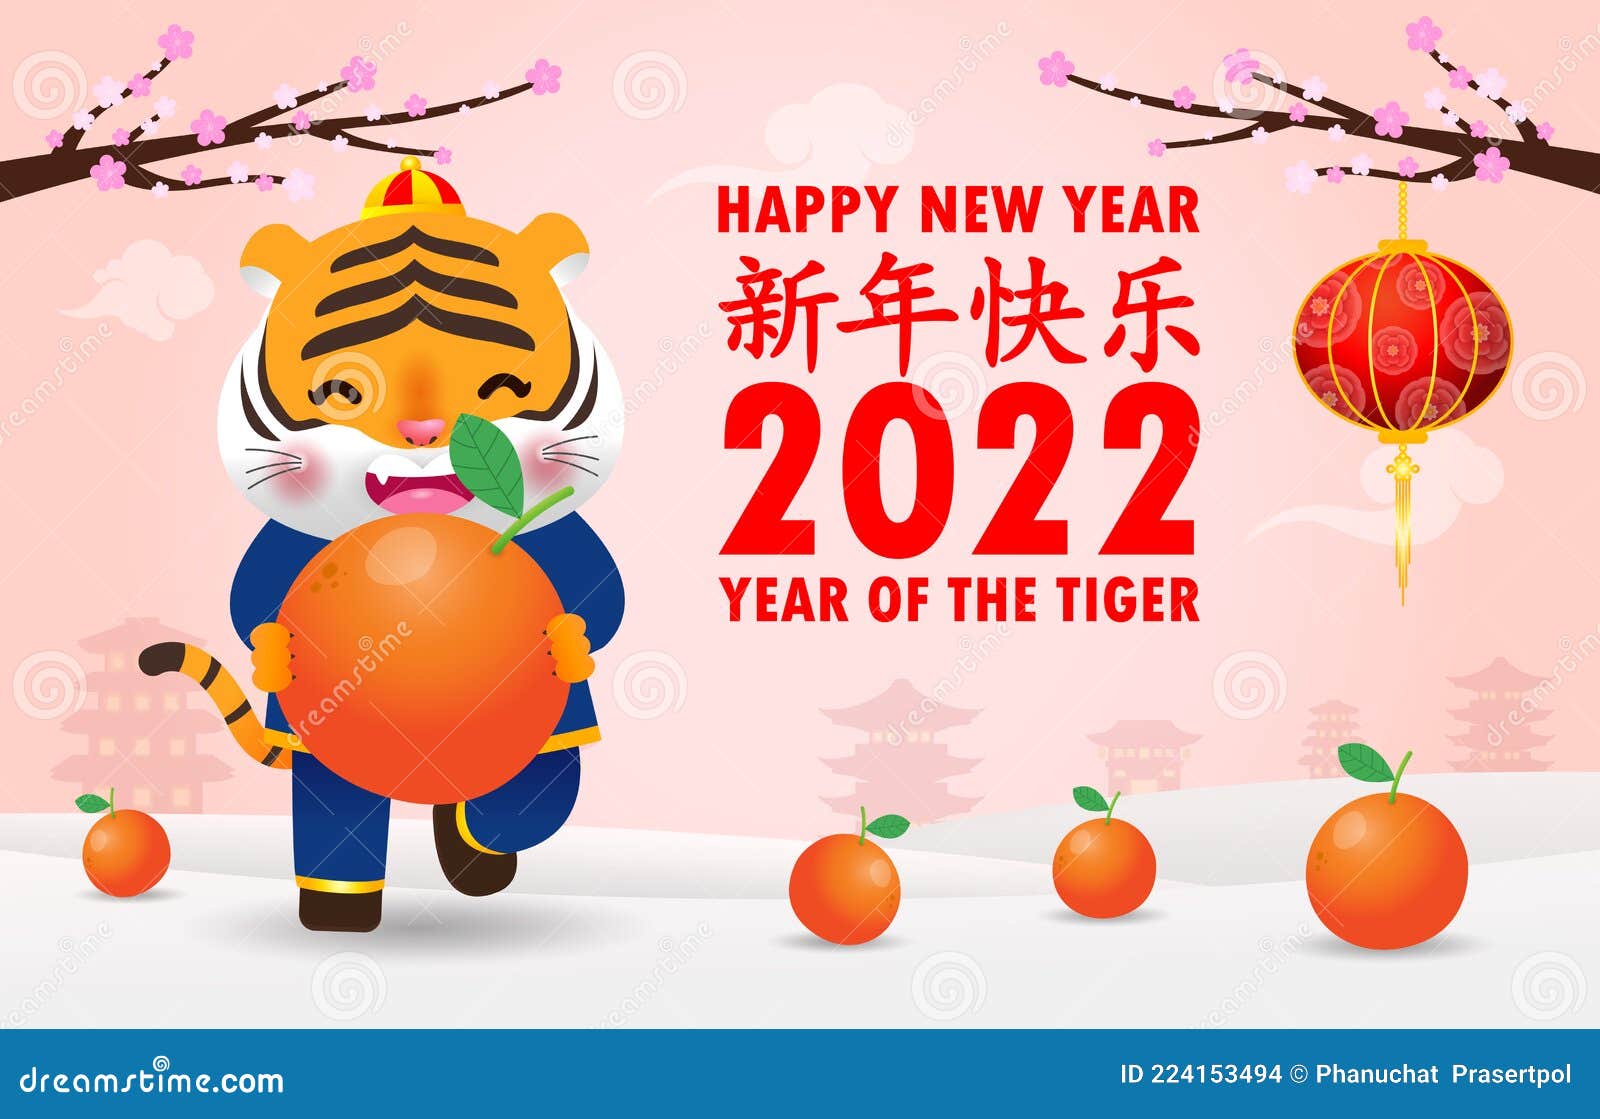 Happy Chinese New Year Greetings 2022